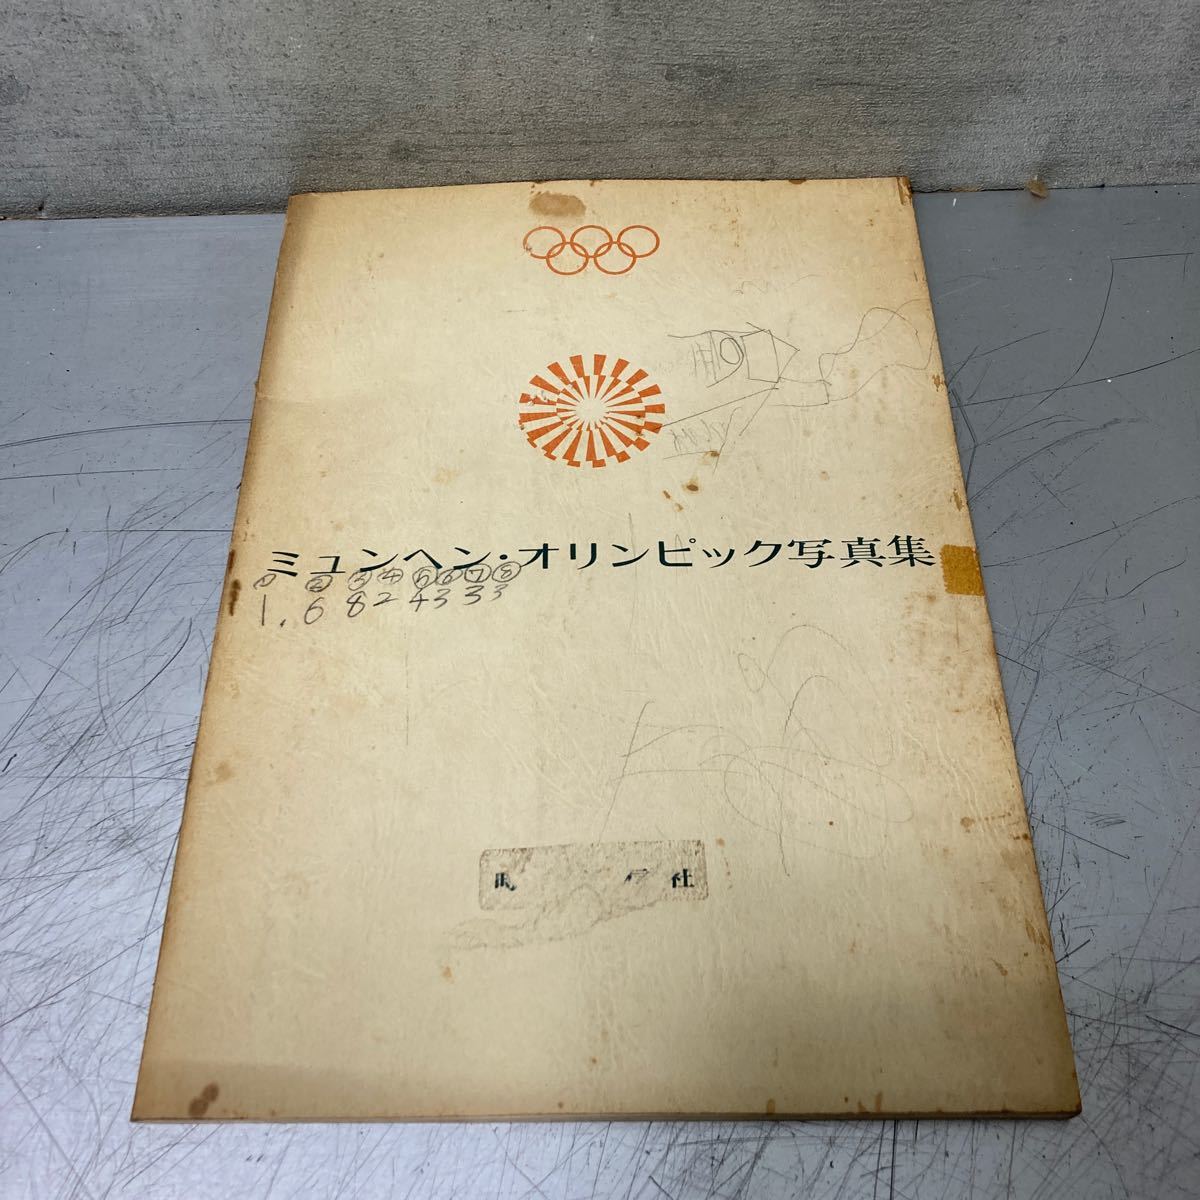 Munich Olympics Photo Album Not for Sale Jiji Press 1972 Retro Goods Vintage Goods, antique, collection, advertisement, Novelty Goods, others